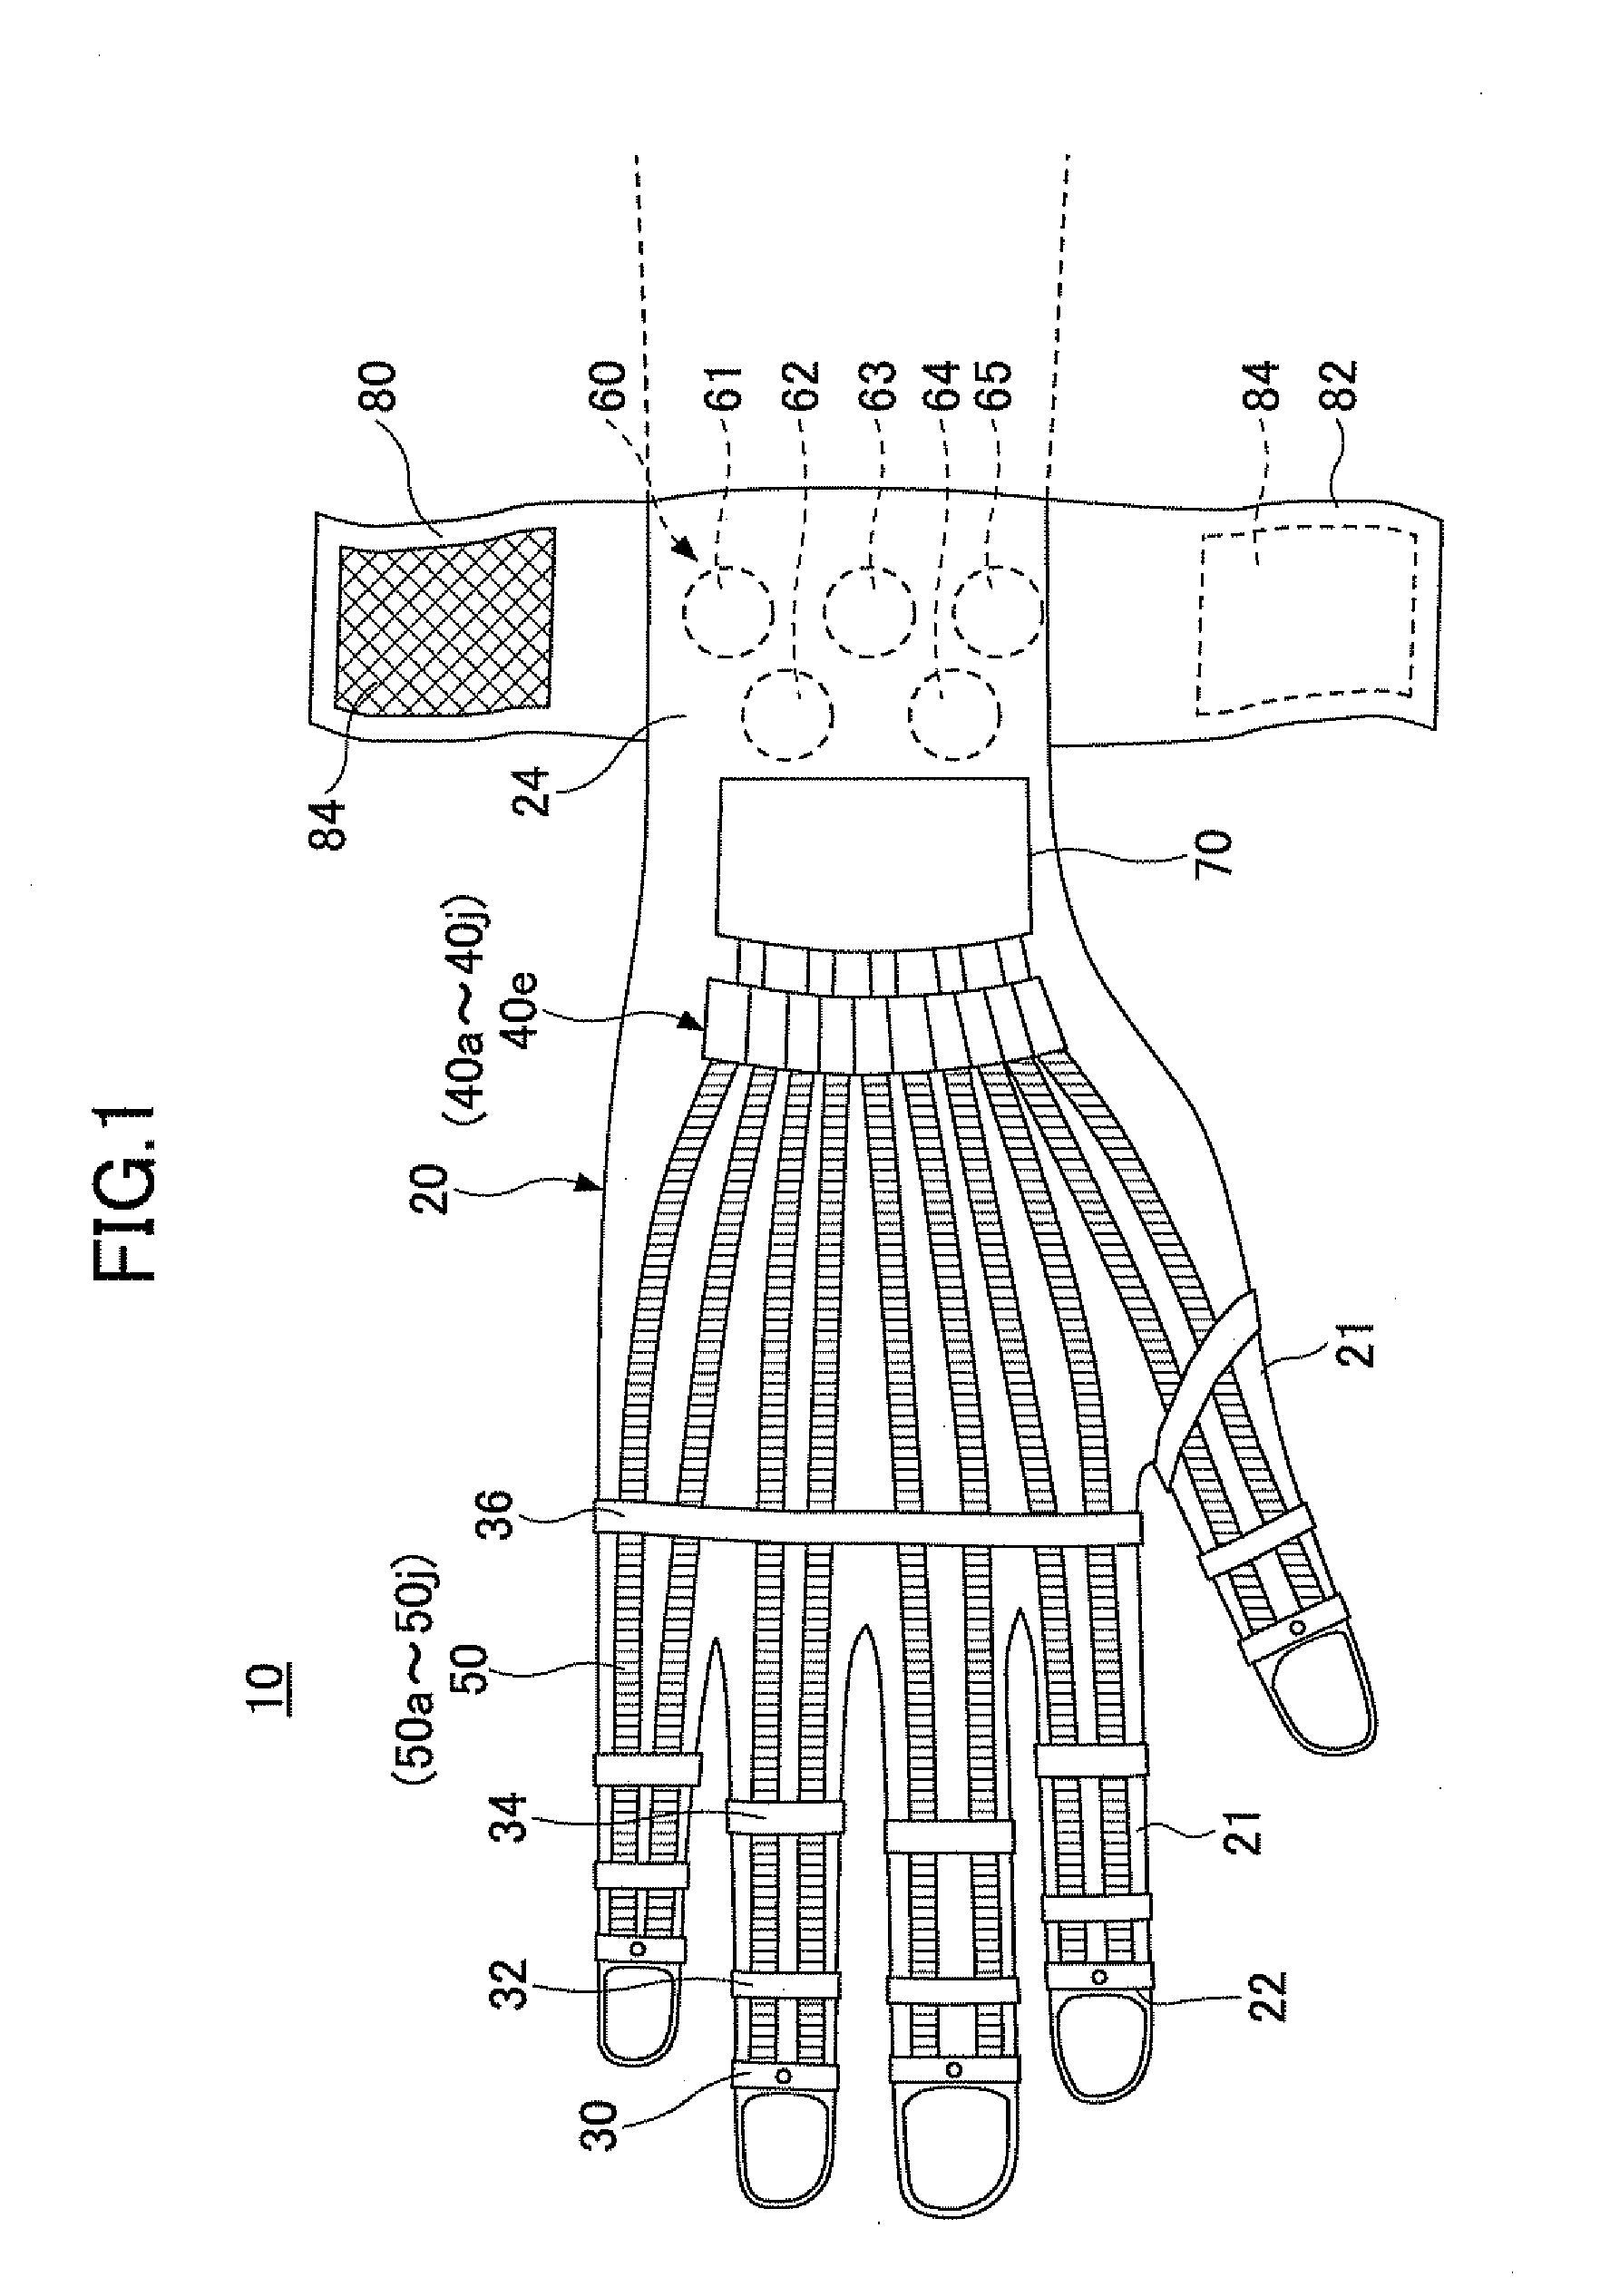 Wearable type movement assisting apparatus